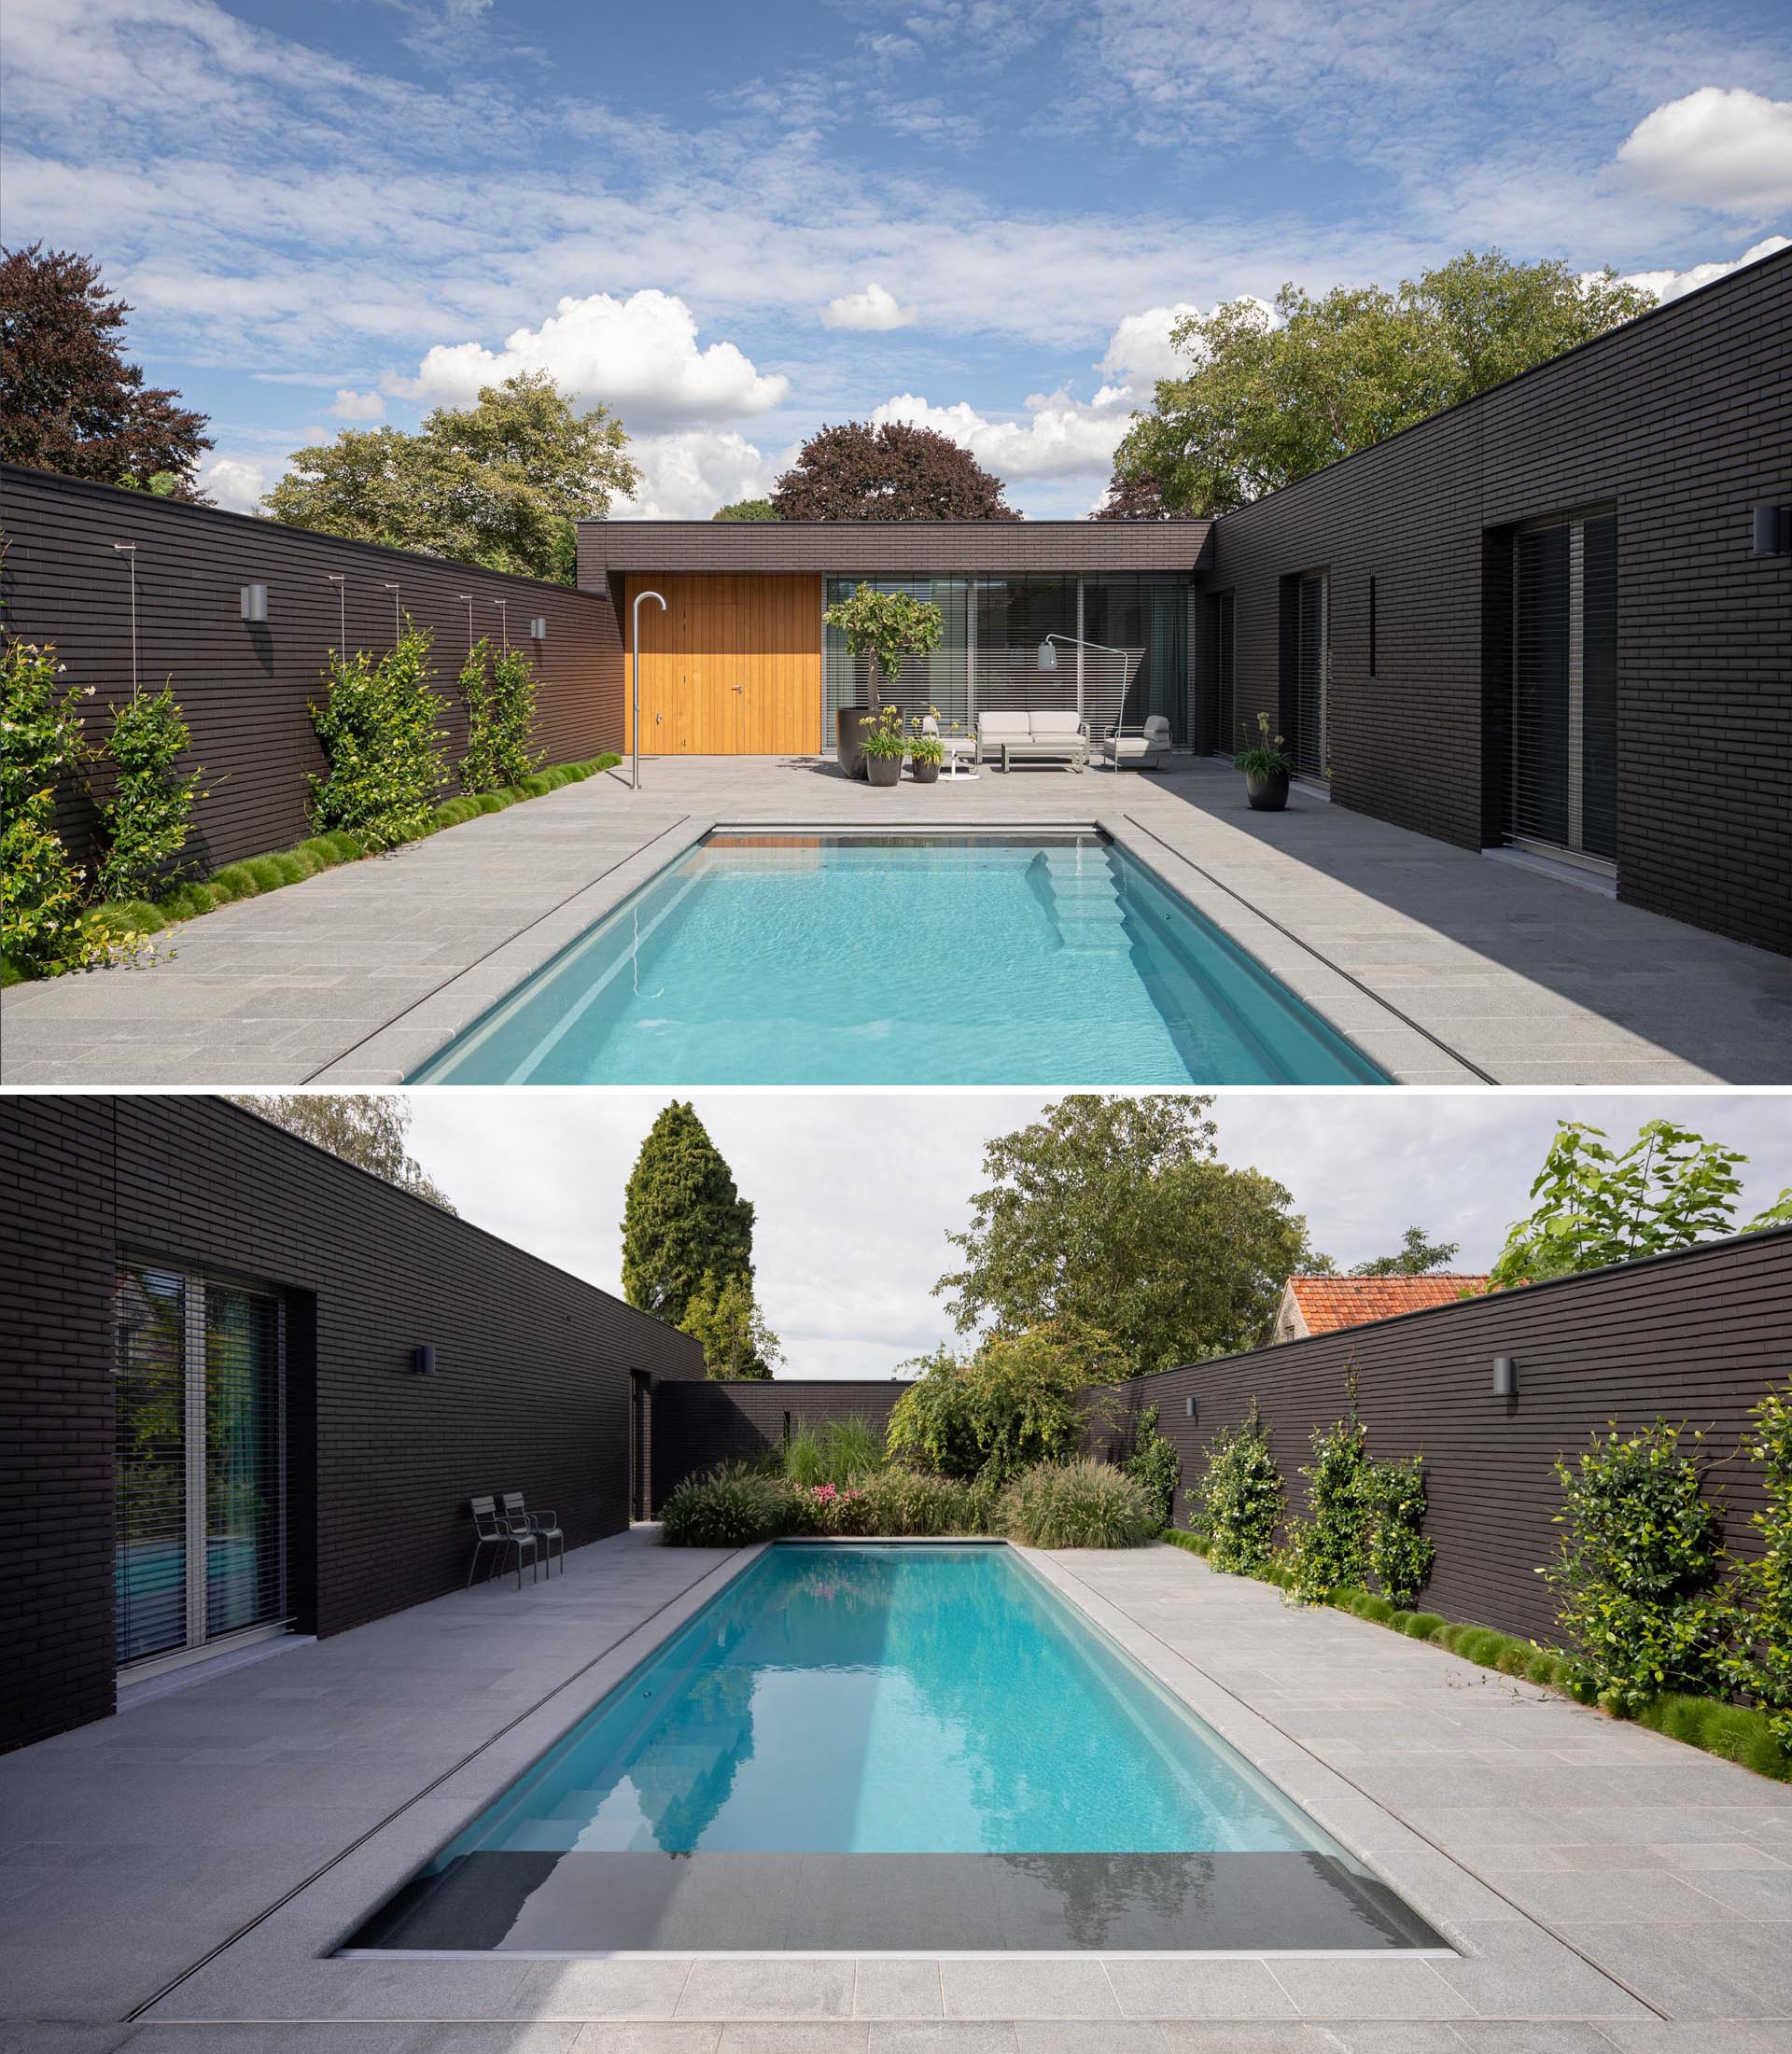 Hidden from the street is a private swimming pool with an outdoor shower and sitting area. Plants have been used as a decorative element along the walls, adding a contrasting element to the black brick.